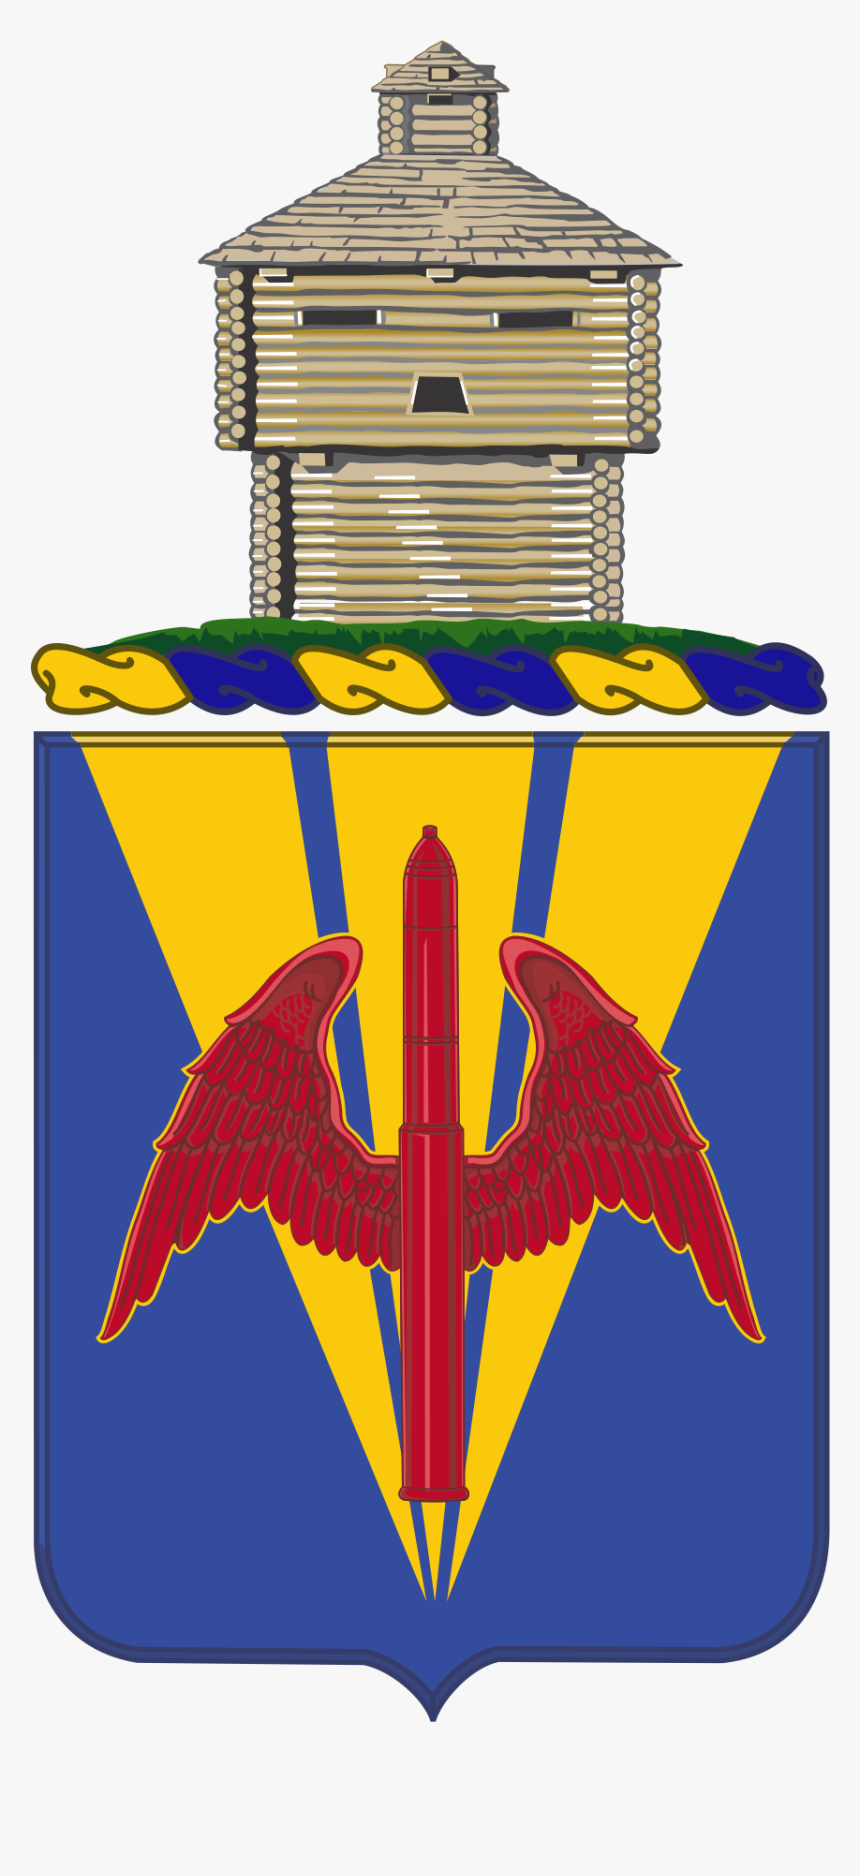 202nd Coast Artillery Coa - Table, HD Png Download, Free Download